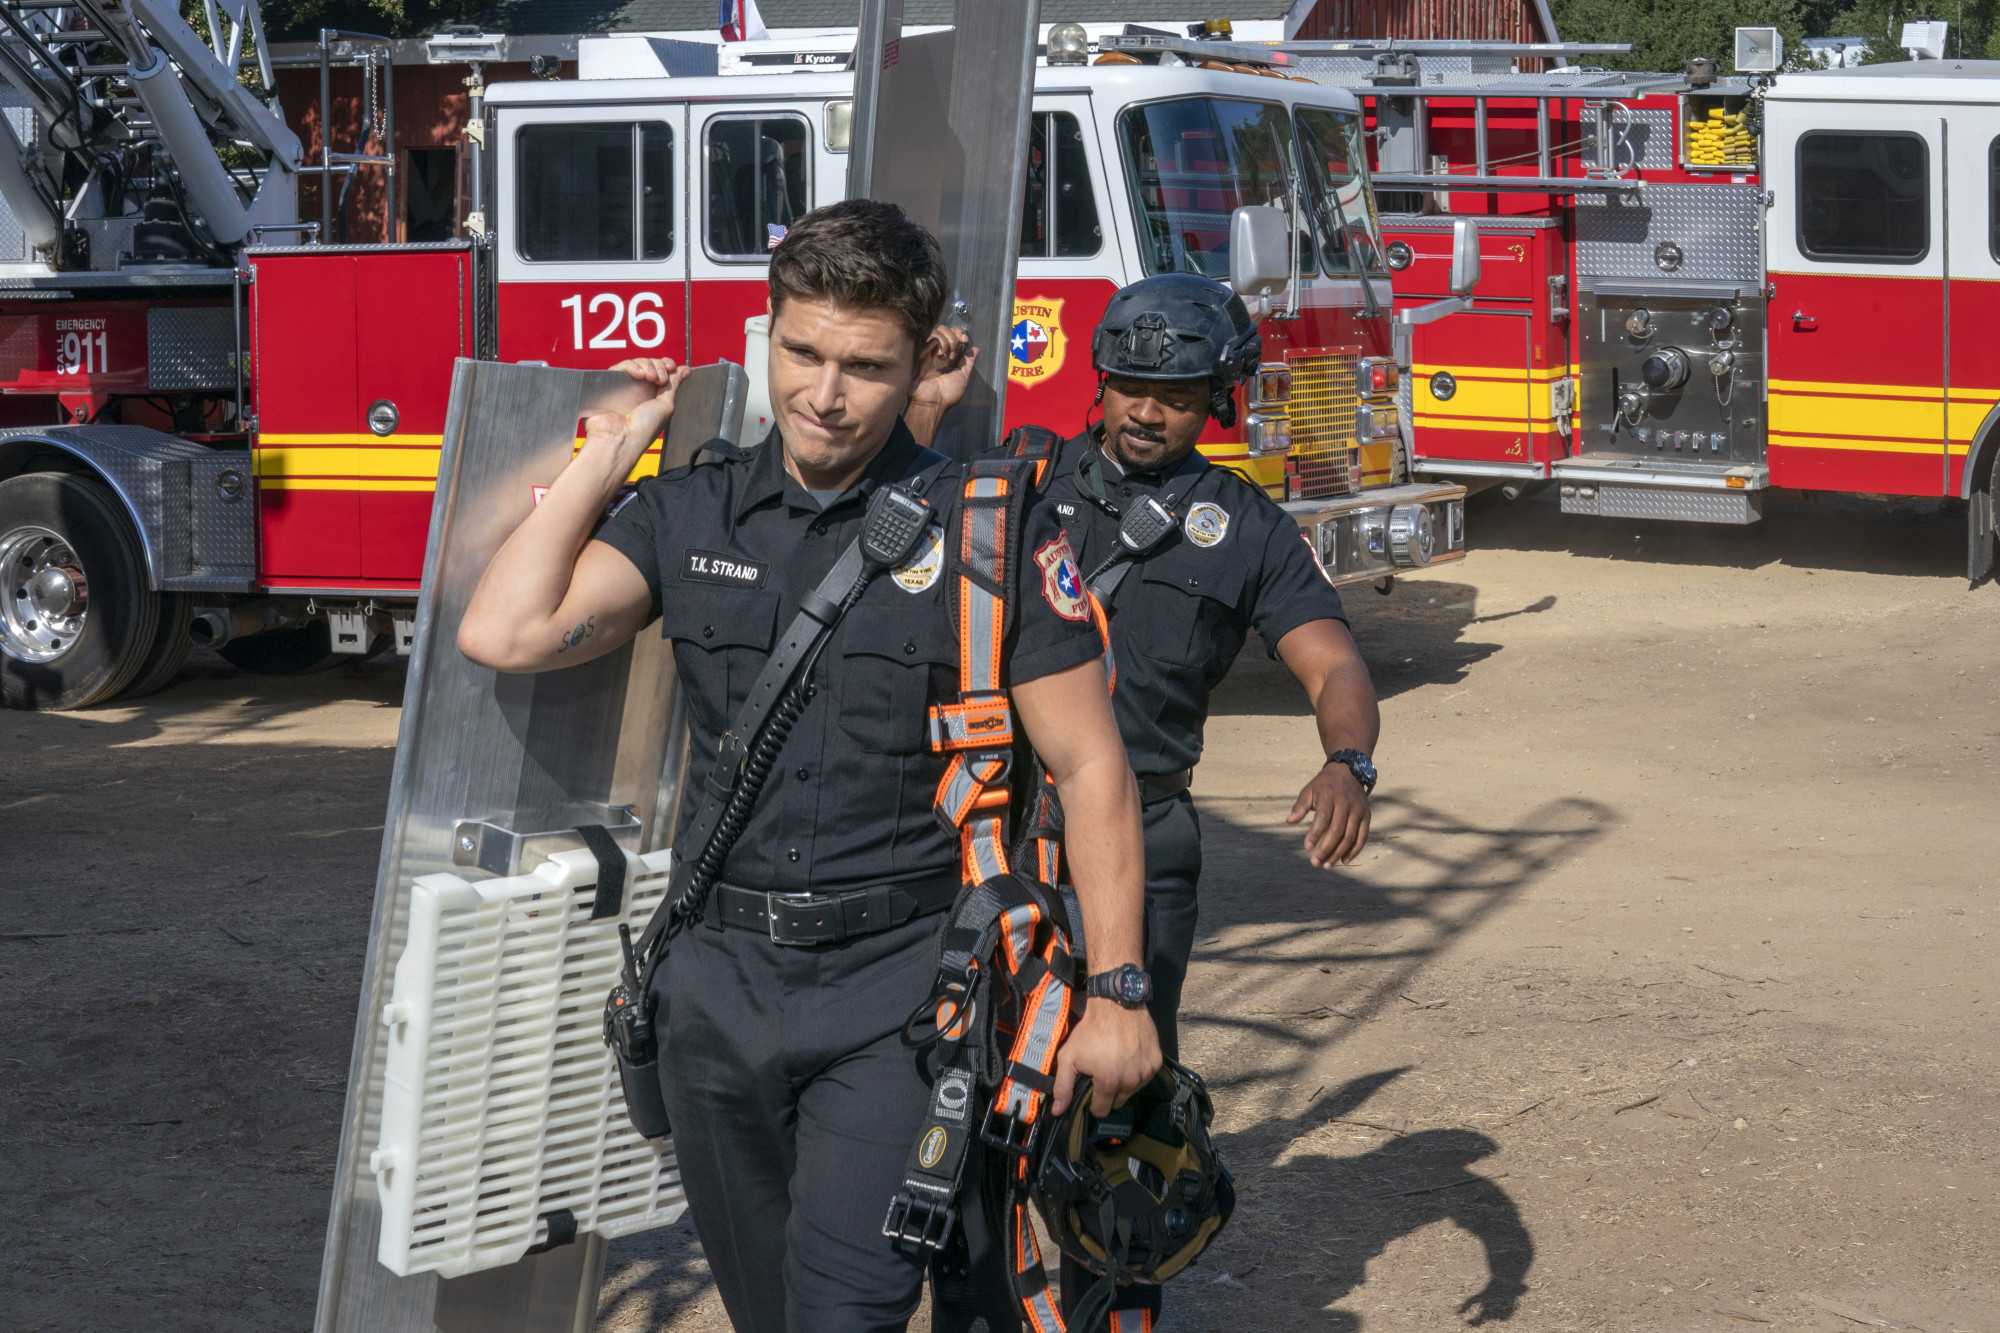 9-1-1: LONE STAR 1x03 "Texas Proud" Photos - When Is Lone Star 911 Coming Back On